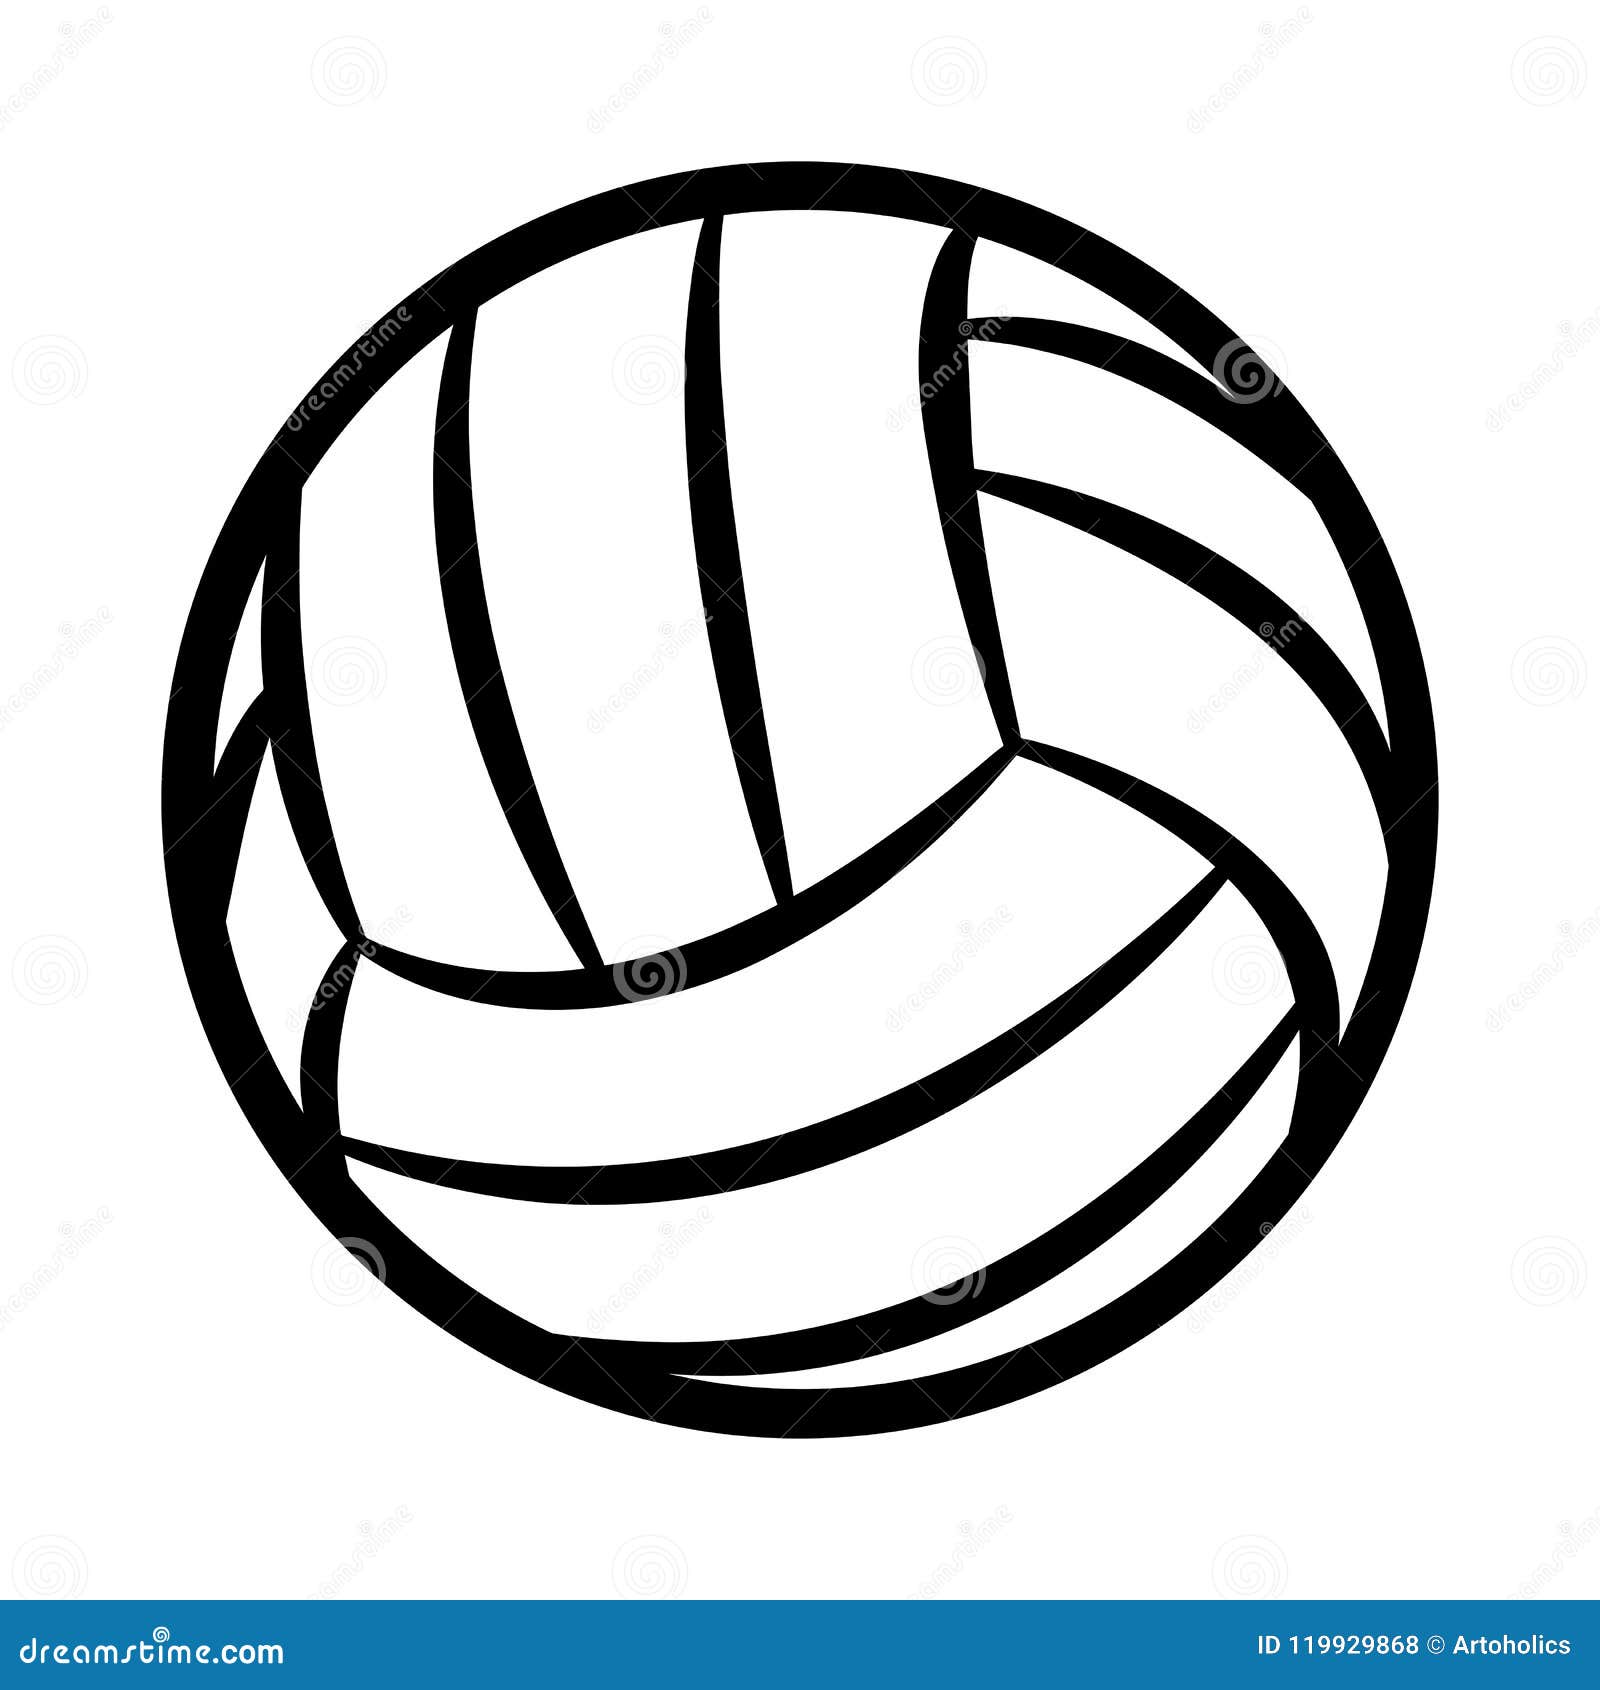 Volleyball Ball Silhouette Vector Illustration Isolated on White Stock ...